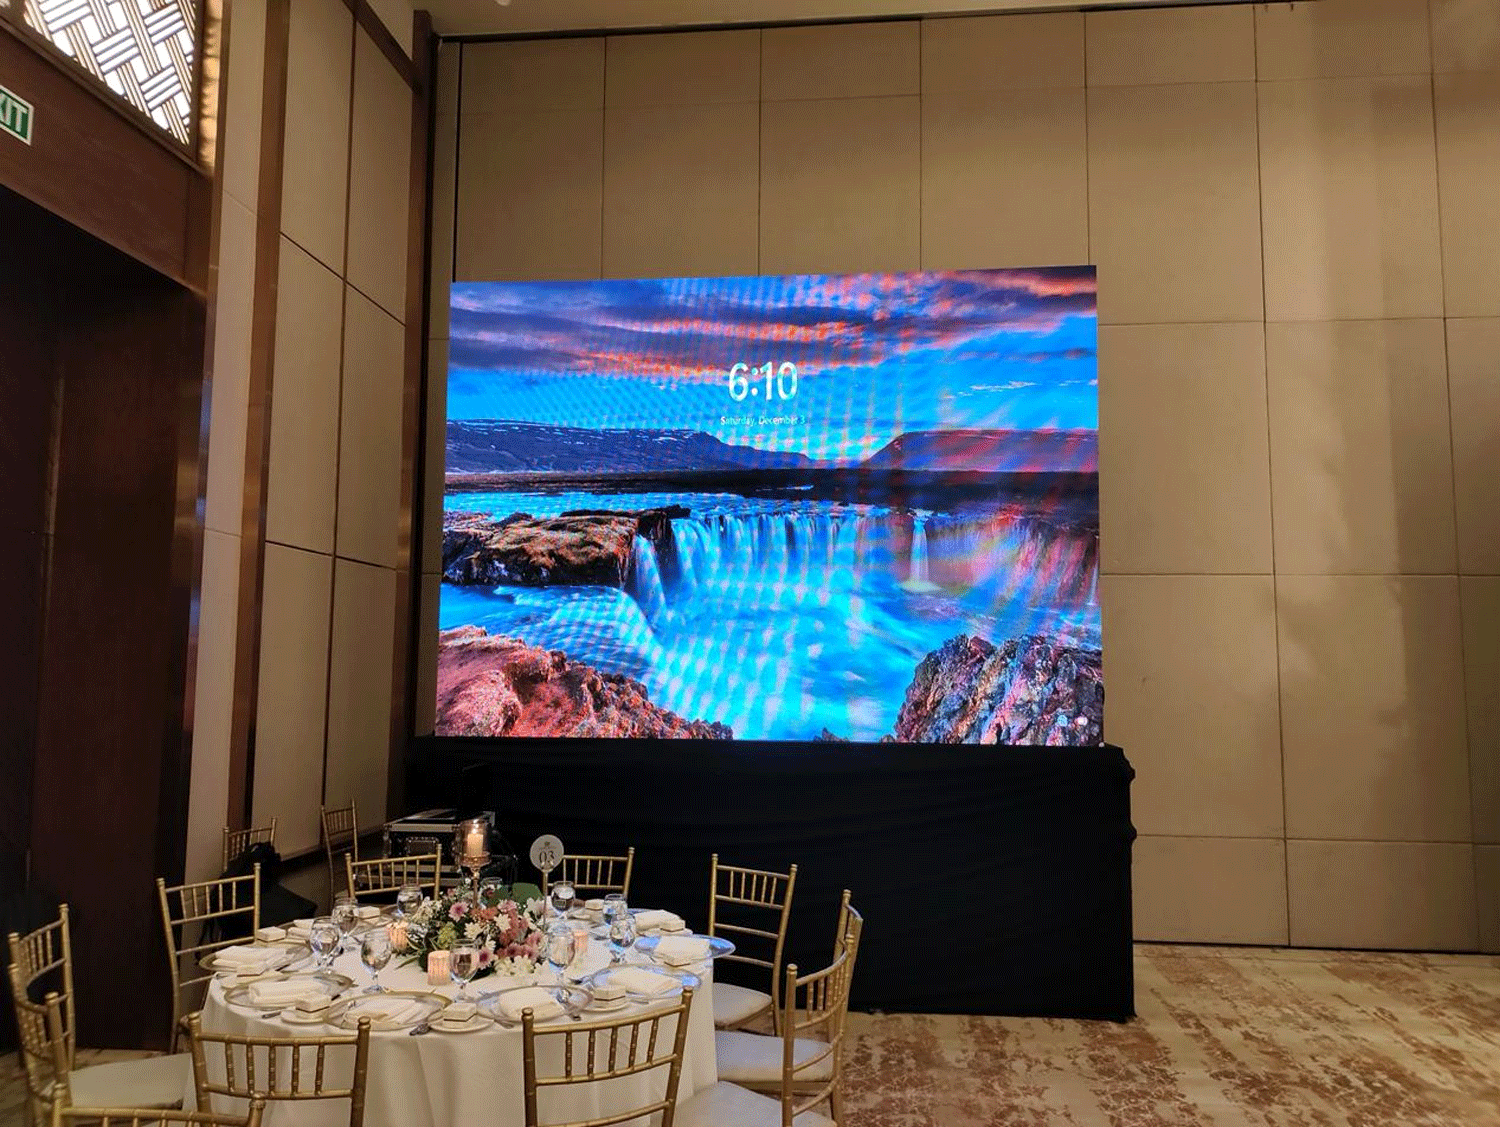 LED Video Wall 10x6.5 Feet (P2.8MM) Rental Package